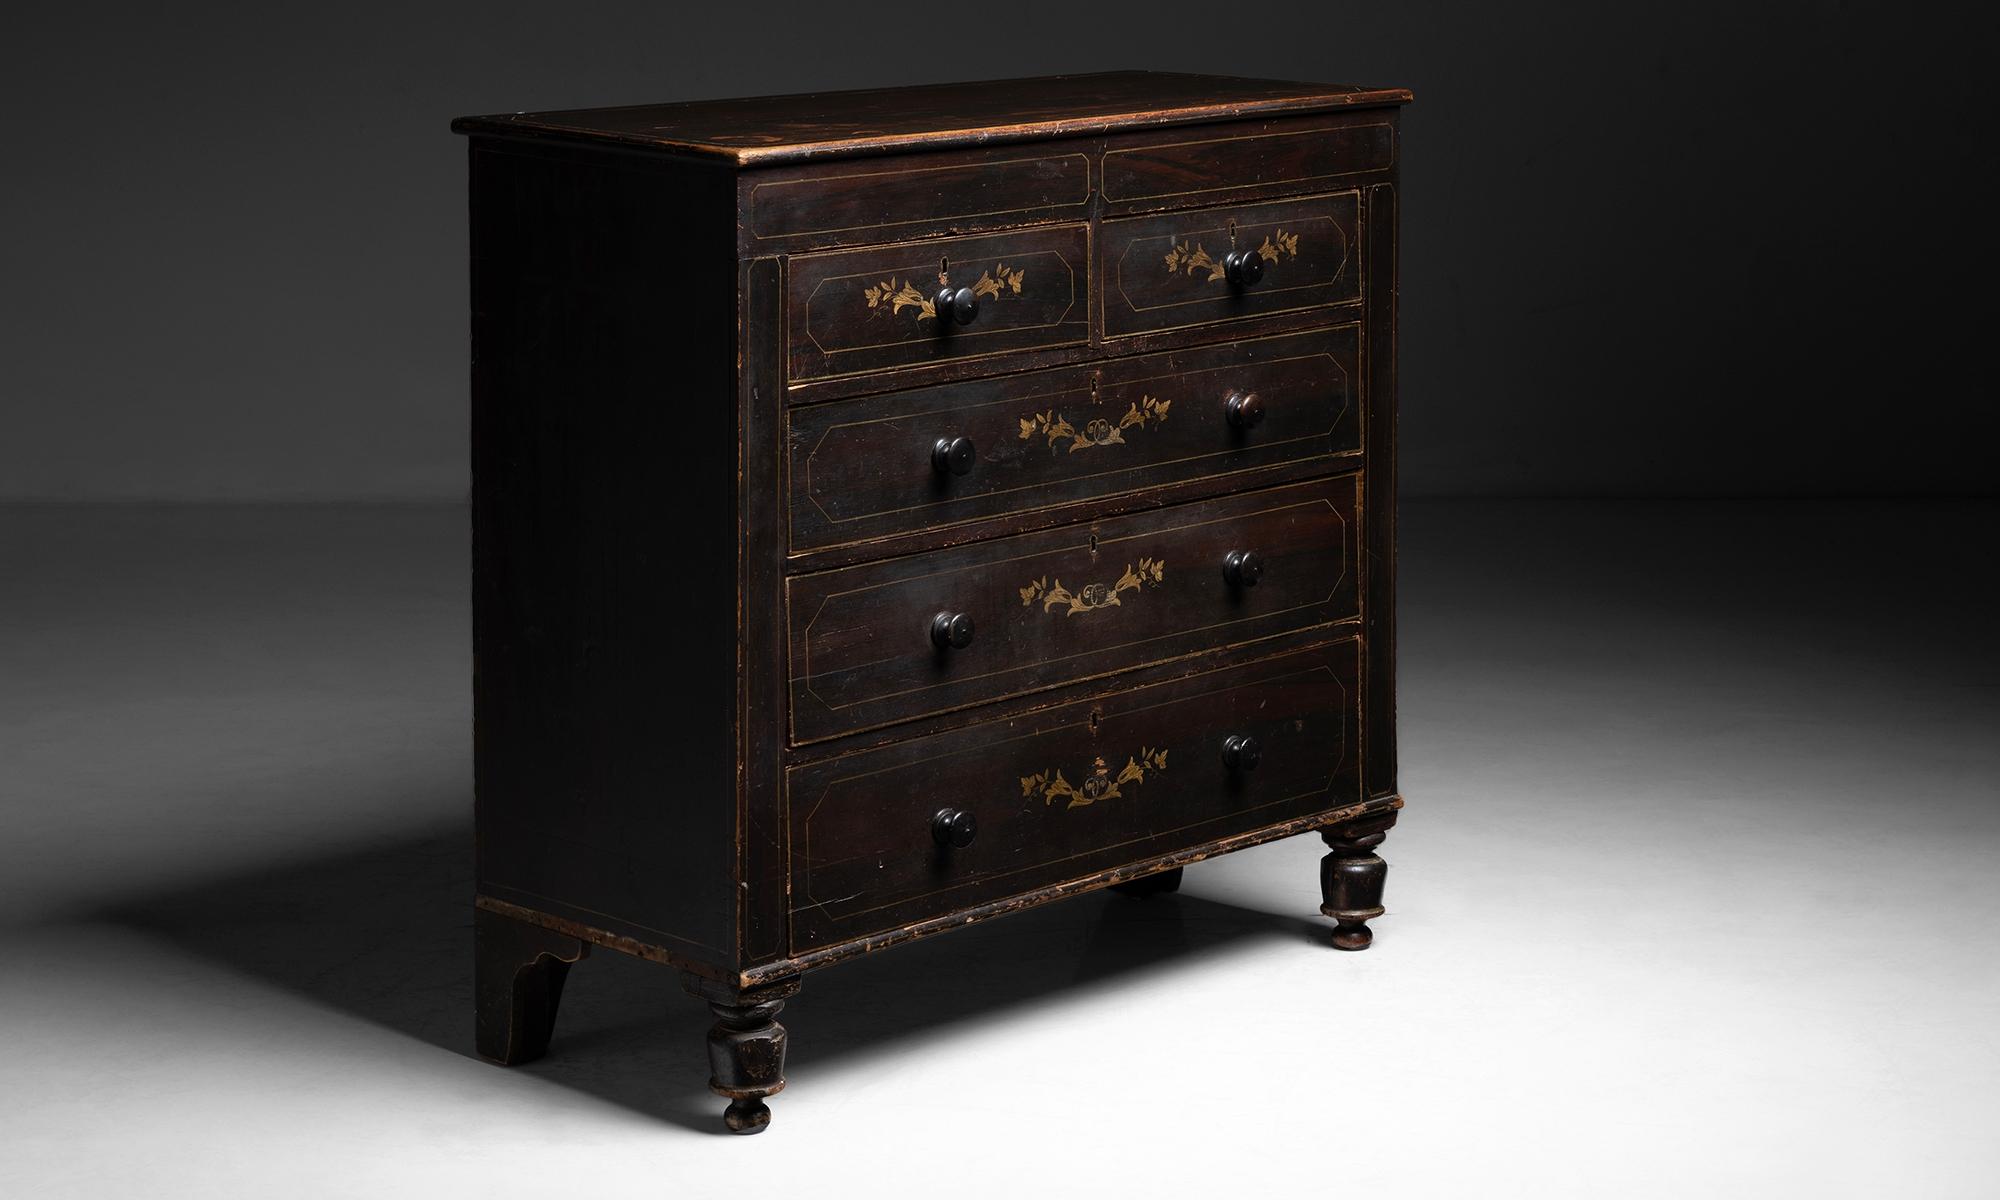 Regency Chest of Drawers

England circa 1830

Constructed from pine with faux rosewood grain and pin striping.

47”L x 20”d x 45.25”h